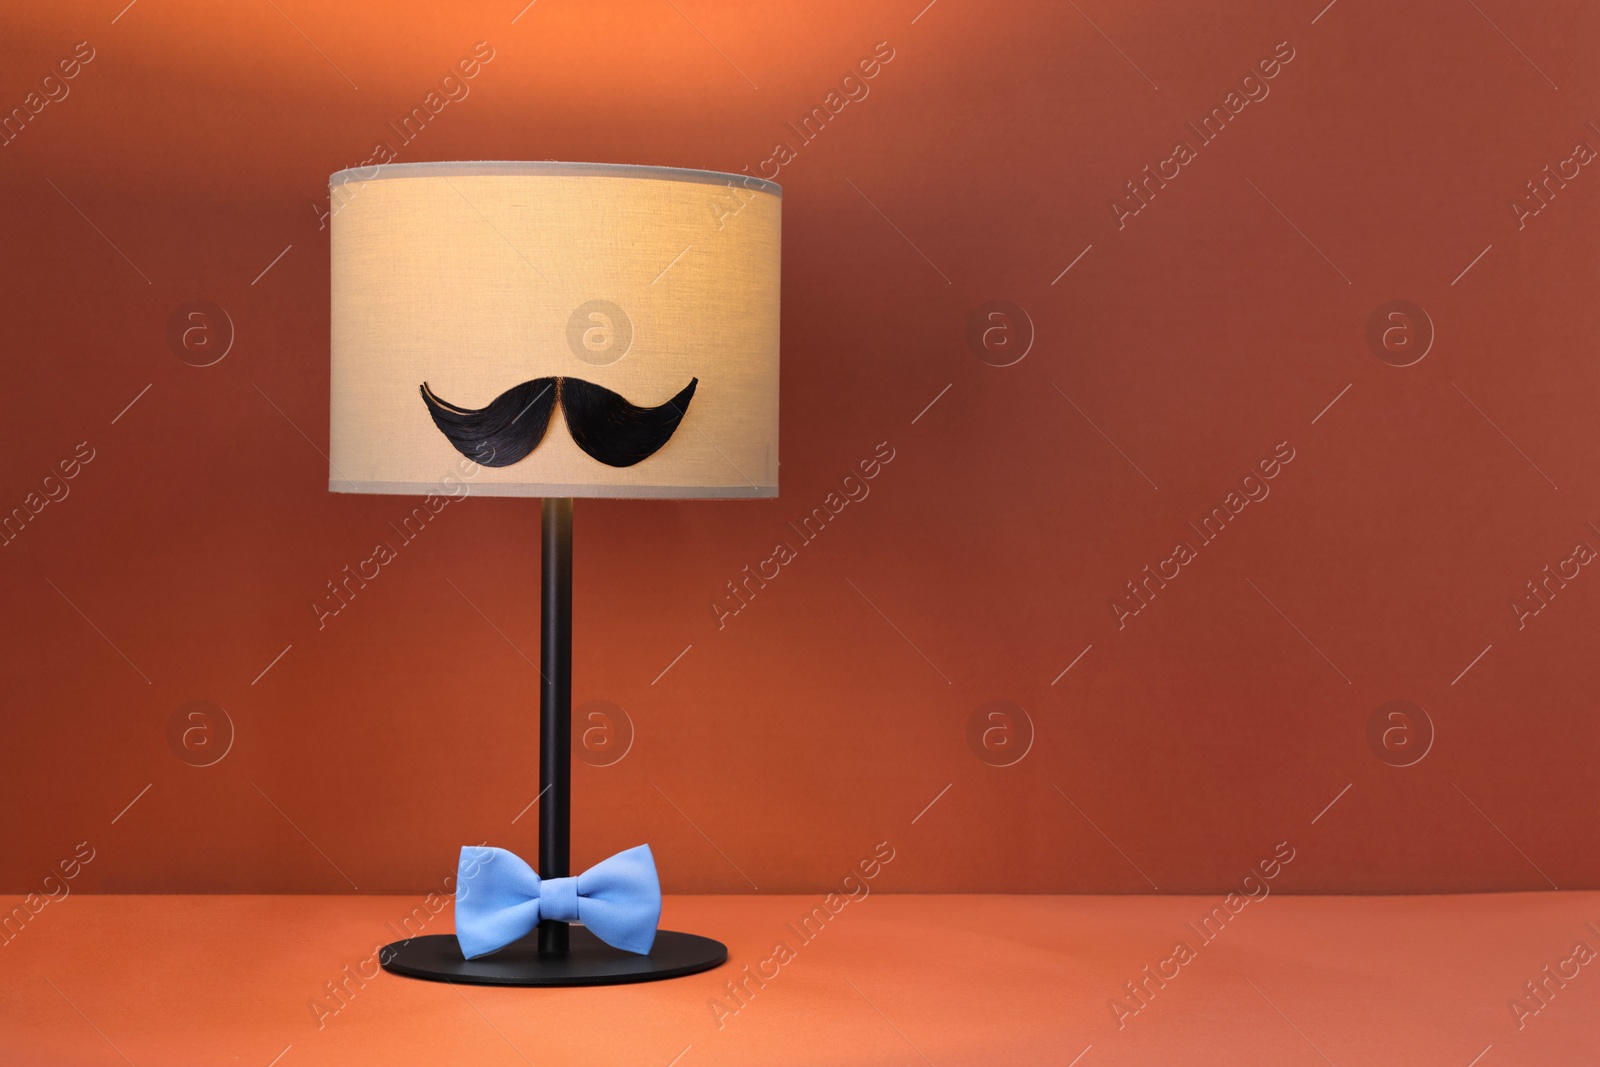 Photo of Man's face made of artificial mustache, bow tie and lamp on terracotta background. Space for text